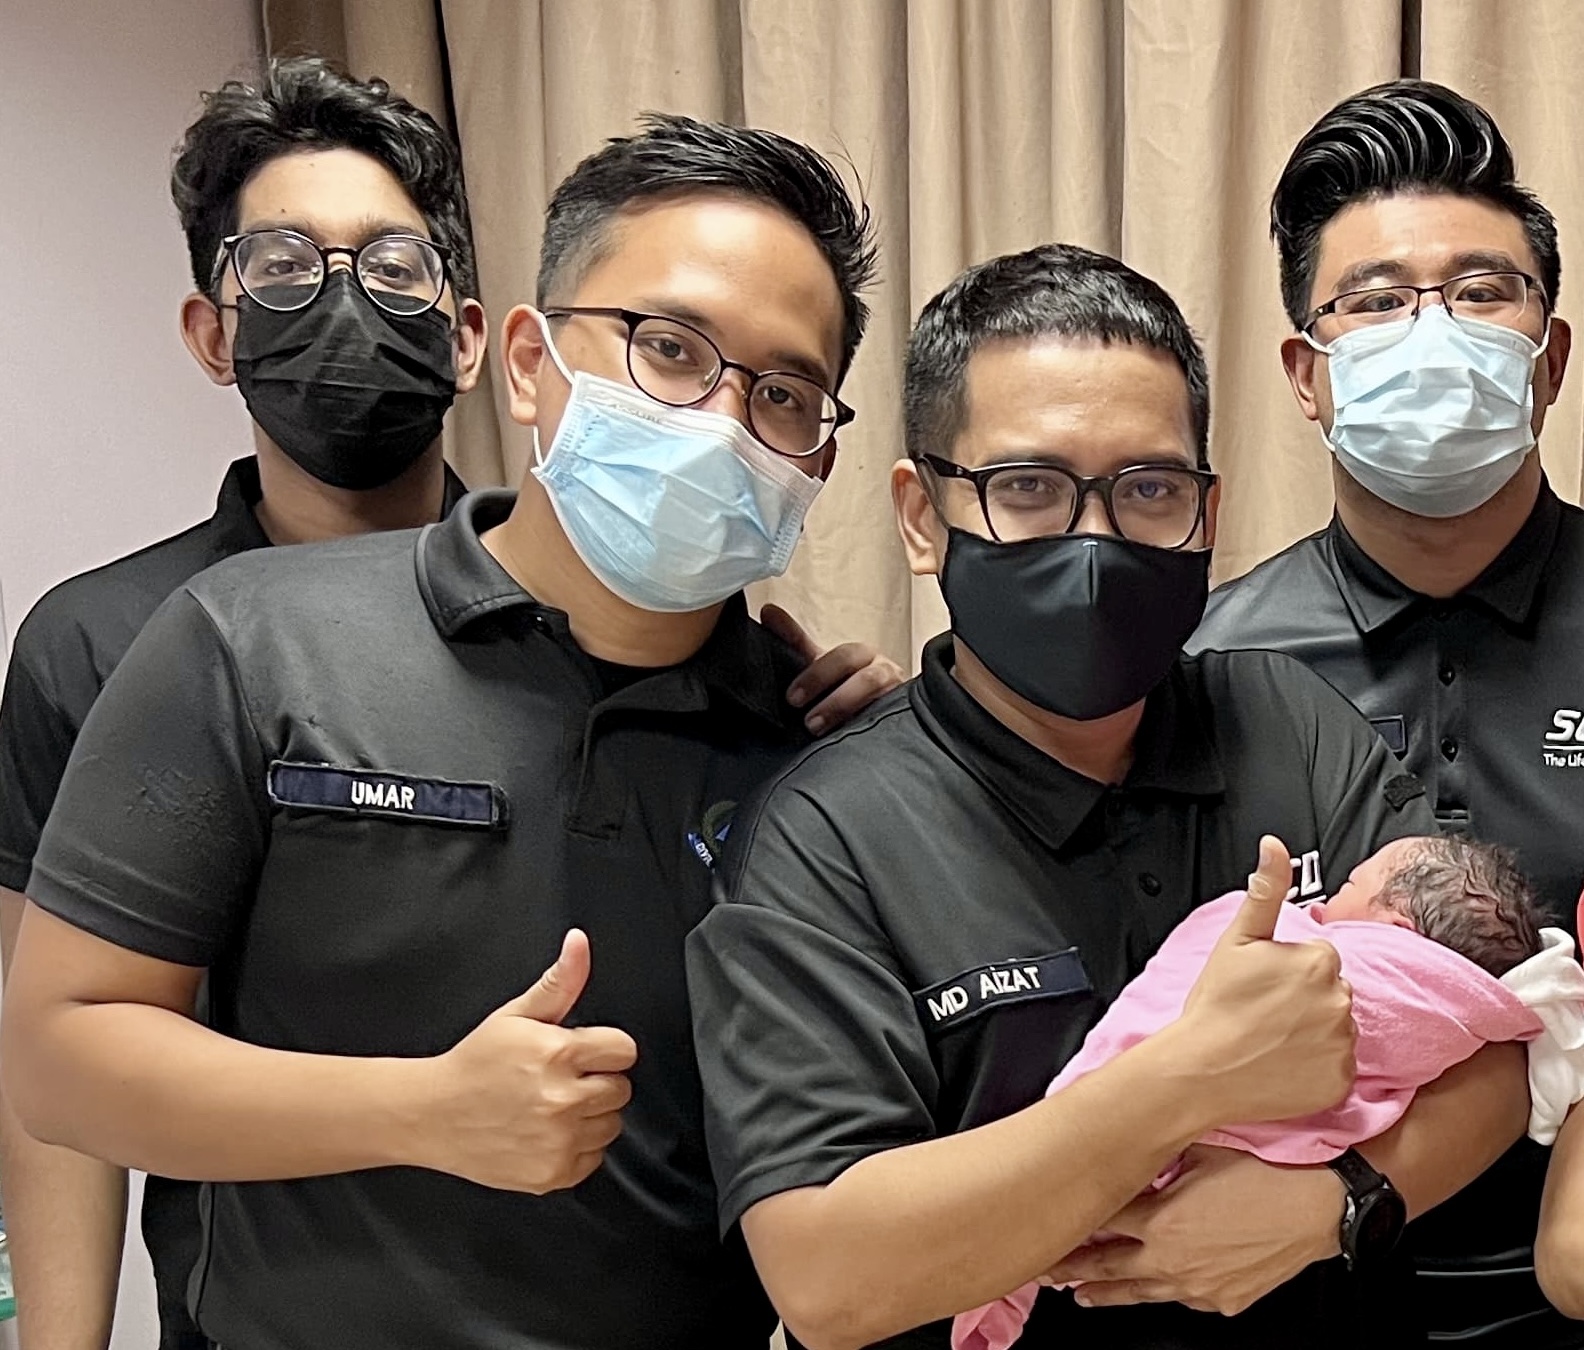 [From left to right] CPL (NS) Muhamad Affiq Malik,  SGT3 Umar Mohamed Sobri Bin Mohammad Khair, SGT3 Muhammad Aizat Bin Mohamad Salim  and WO1 Muhammad Husnul Bin Halim with the baby after the safe delivery.